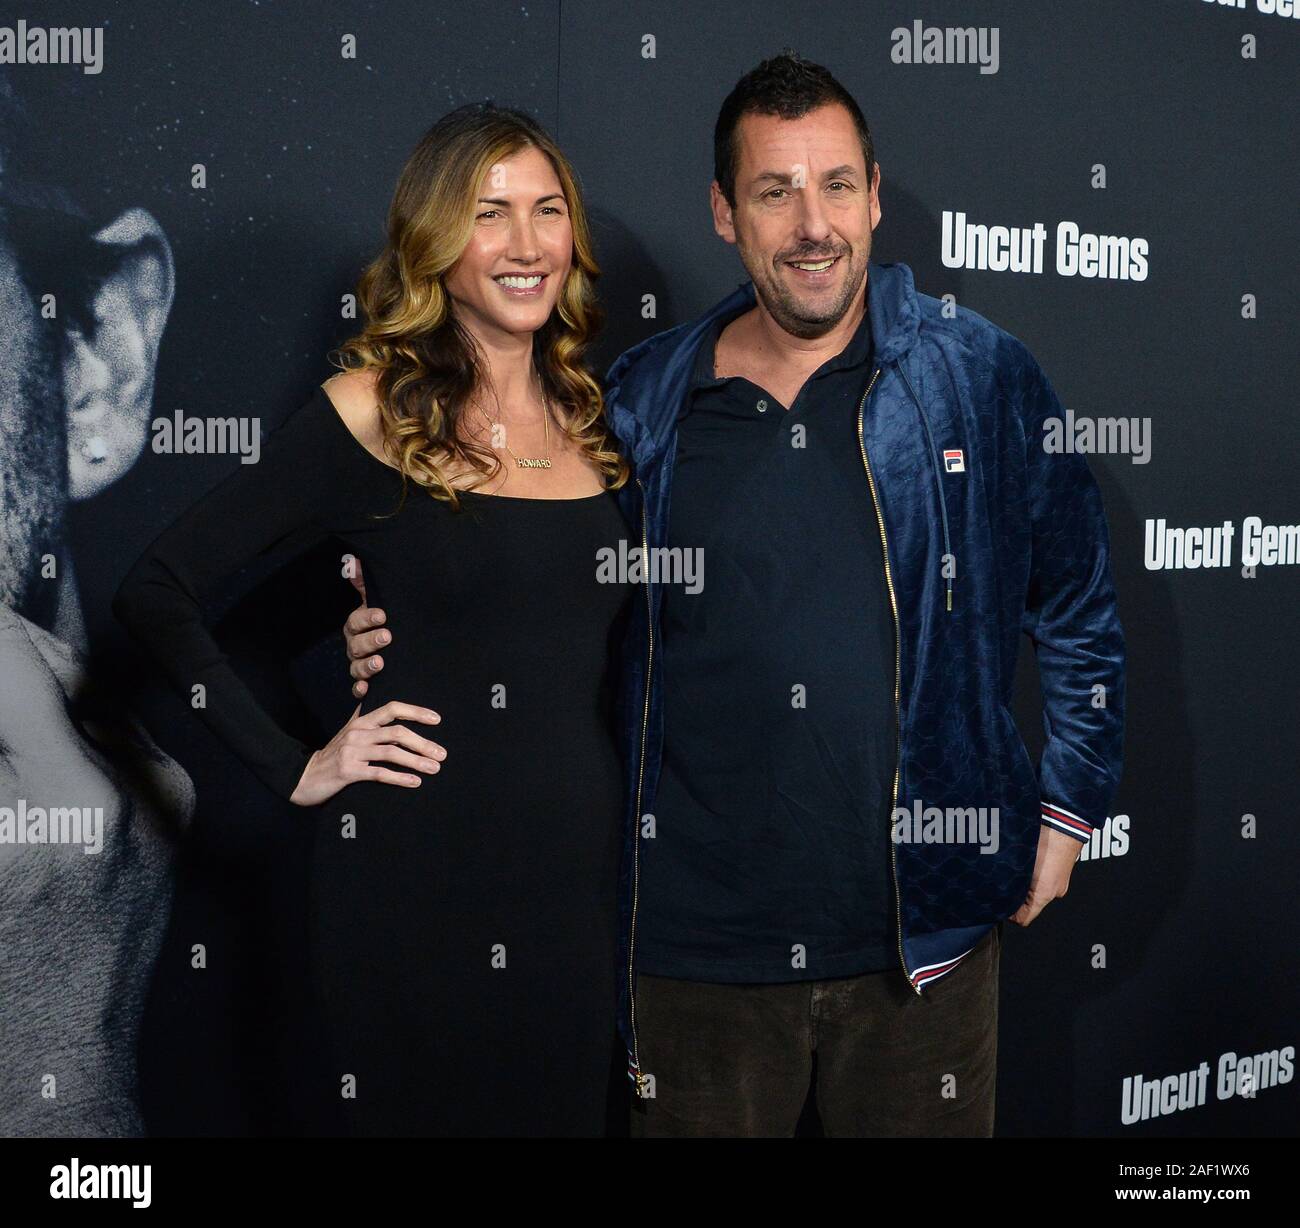 Hollywood California Usa 12th Dec 2019 Cast Member Adam Sandler And His Wife Jackie Sandler Attend The Premiere Of The Motion Picture Crime Thriller Uncut Gems At The Arclight Cinema Dome In